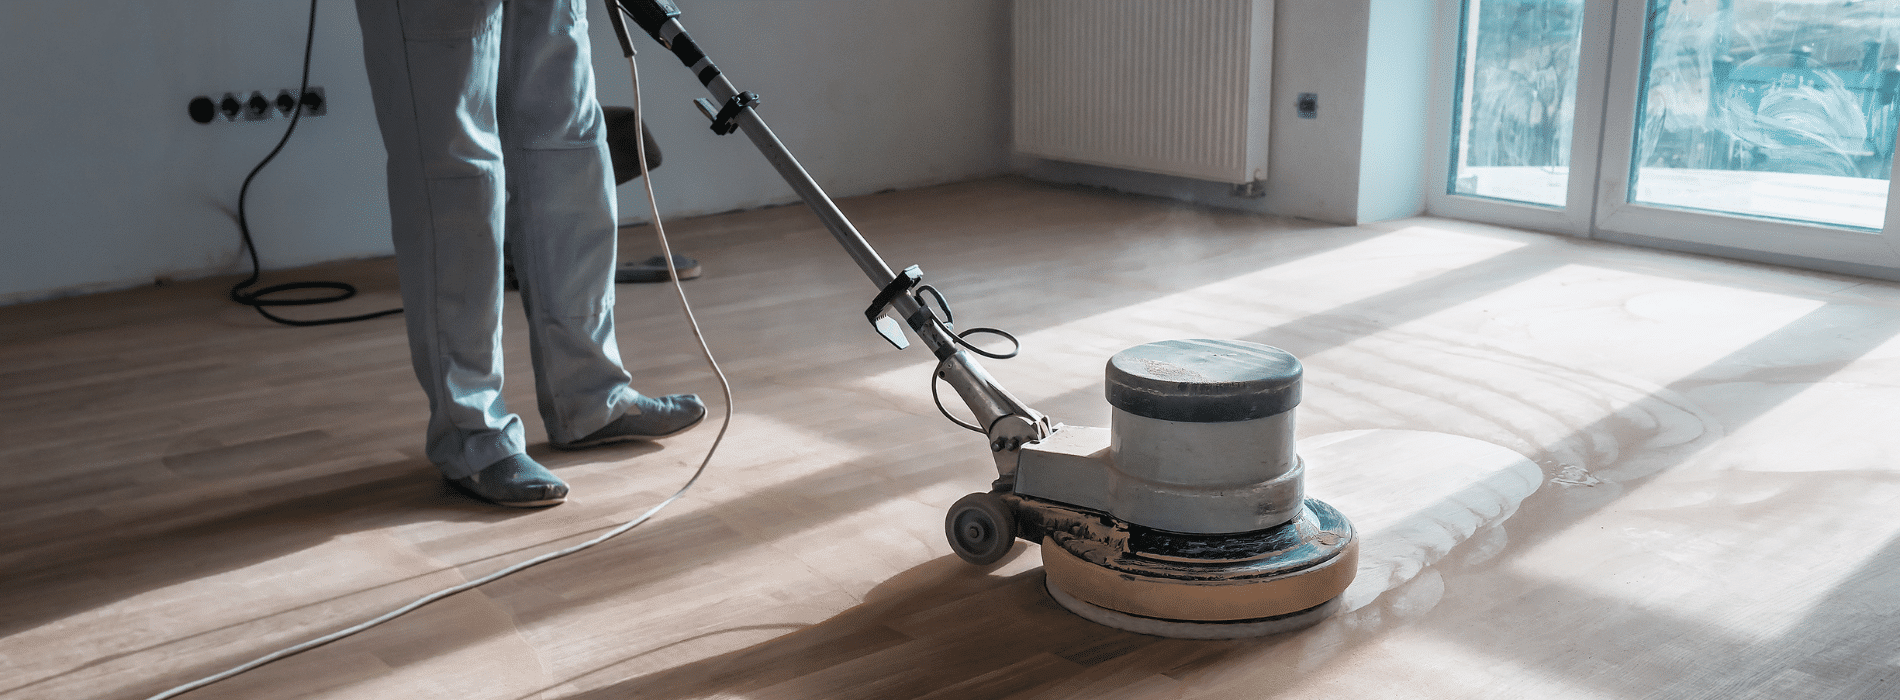 Mr Sander® use a Bona FlexiSand 1.5 buffer sander with a 407 mm size and a 1.5 kW effect in Billingsgate, EC3. It runs on 230 V power and 50/60 Hz frequency. This strong instrument is linked to a HEPA-filtered dust extraction system, ensuring a clean and efficient outcome. 